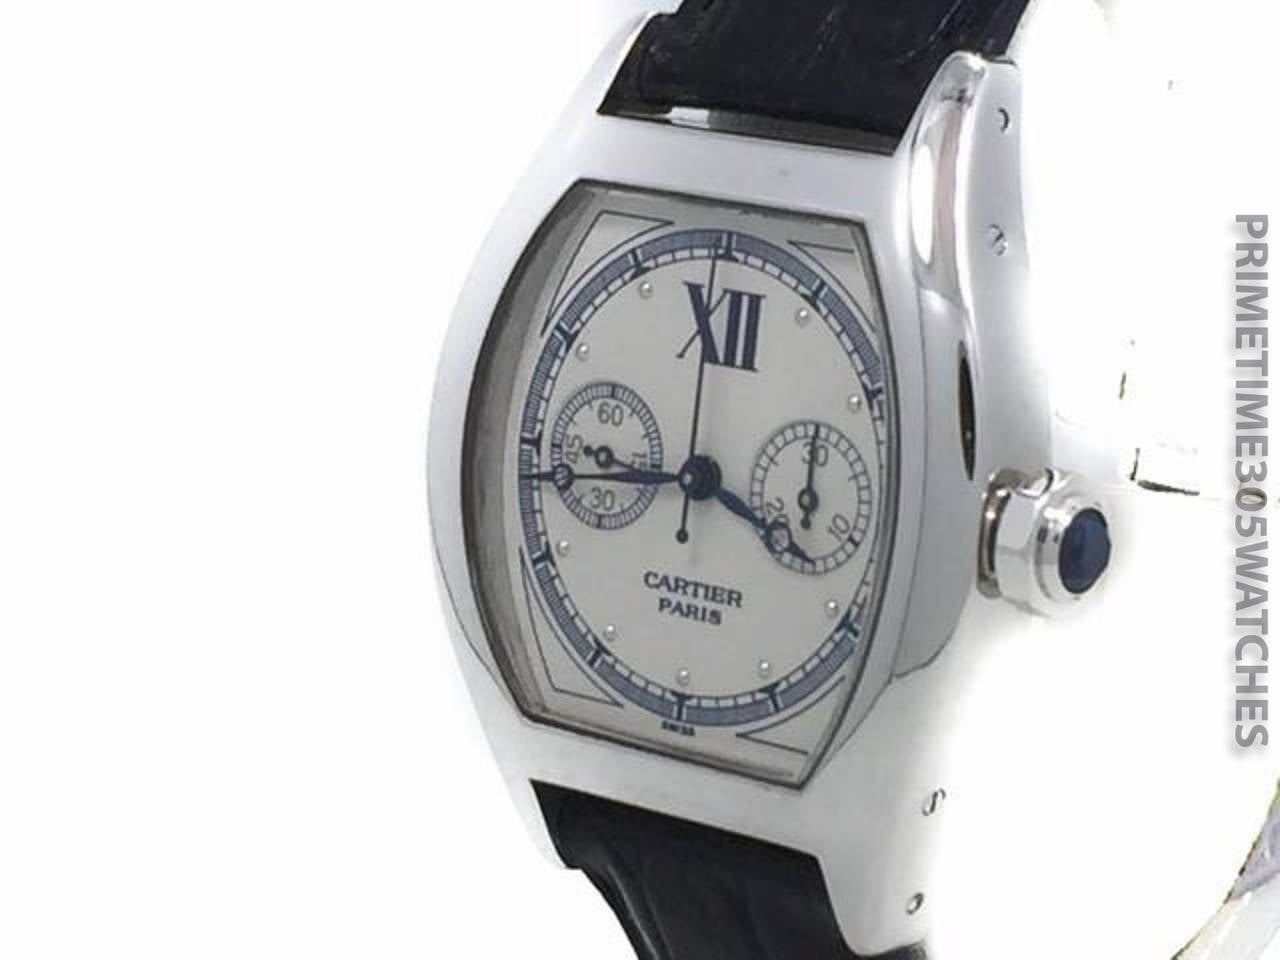 Mens Cartier Privee Tortue Monopoussoir Single Button Chronograph Watch in 18k White Gold On Leather Strap & 18k Cartier Deployment Buckle. The Watch is In Excellent Condition Working Great, Movement is Operated by Mechanical Winding. Included with